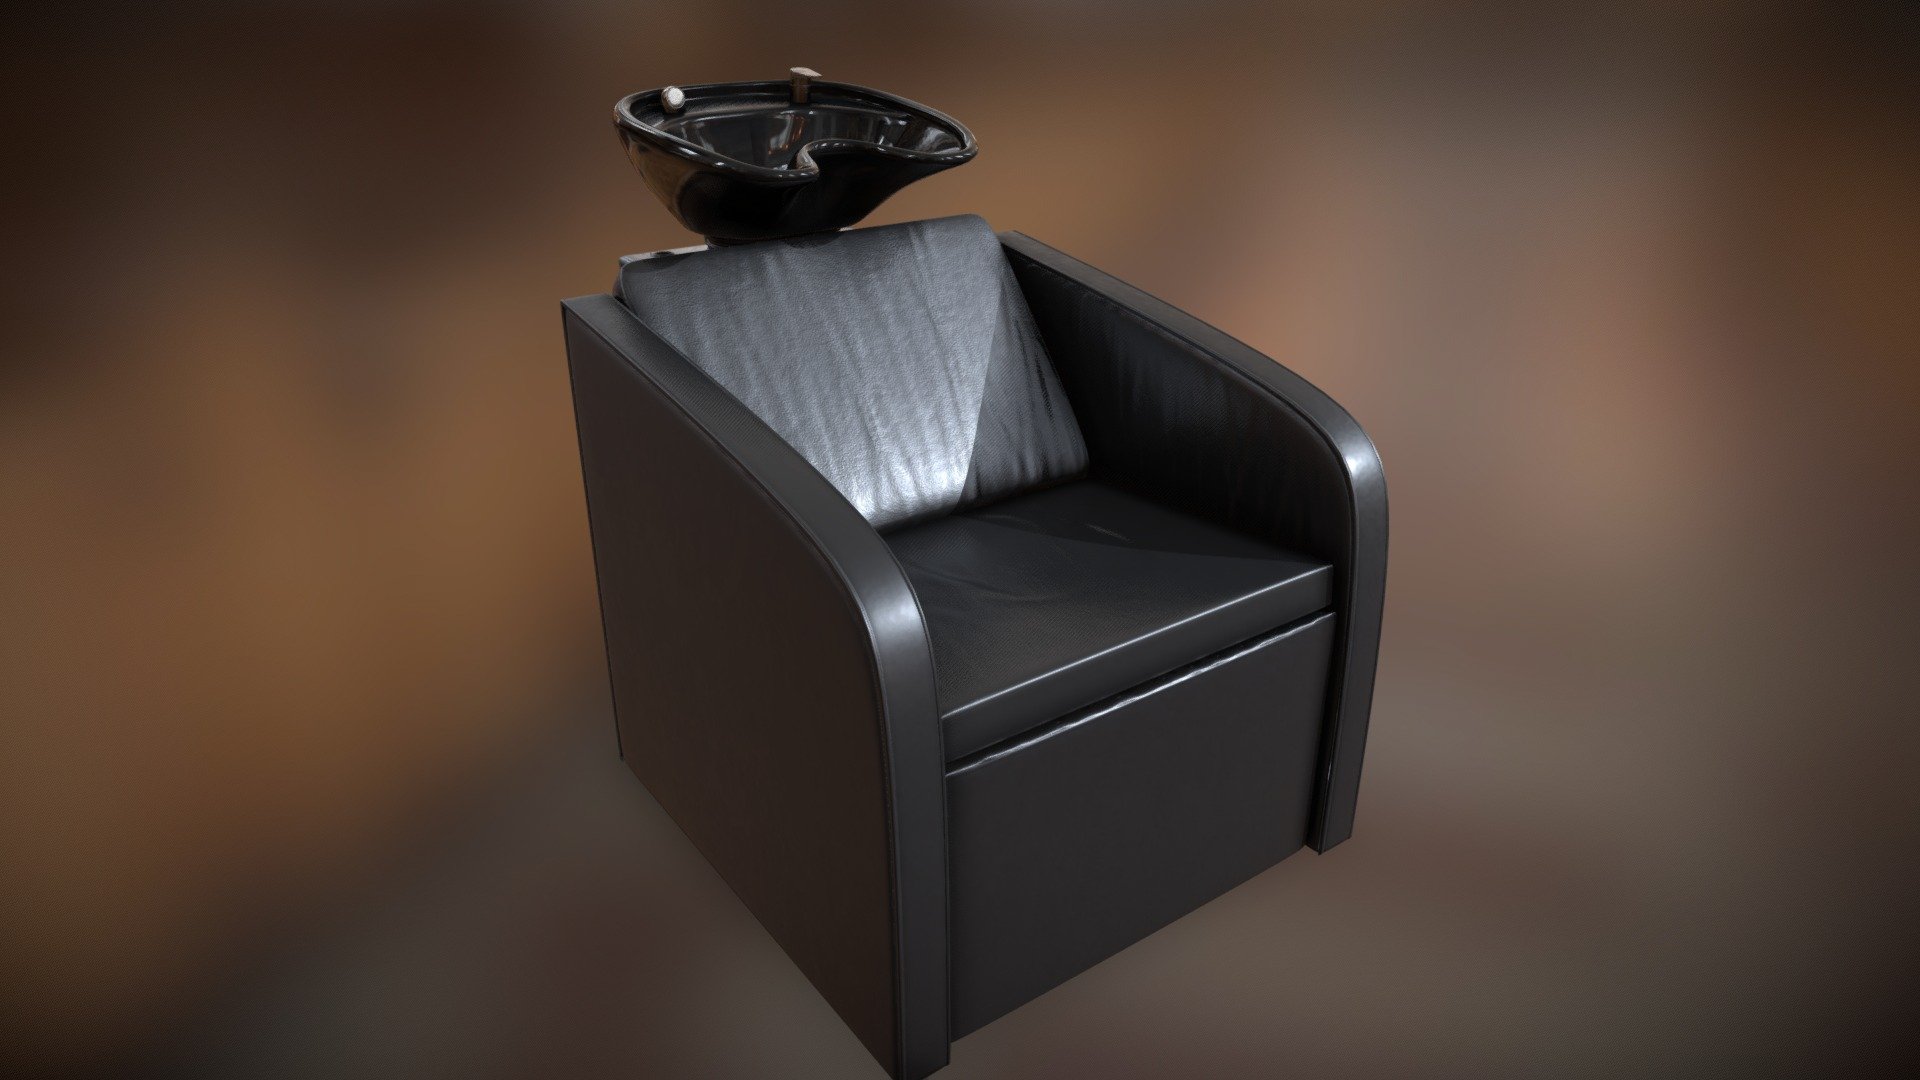 Hair was basin model
Clean UVs
Textures up to 4k 
Separated into 3 parts: Basin, Basin stand and Chair - Station Hair Wash Basin - Download Free 3D model by Tyron (@Omty) 3d model